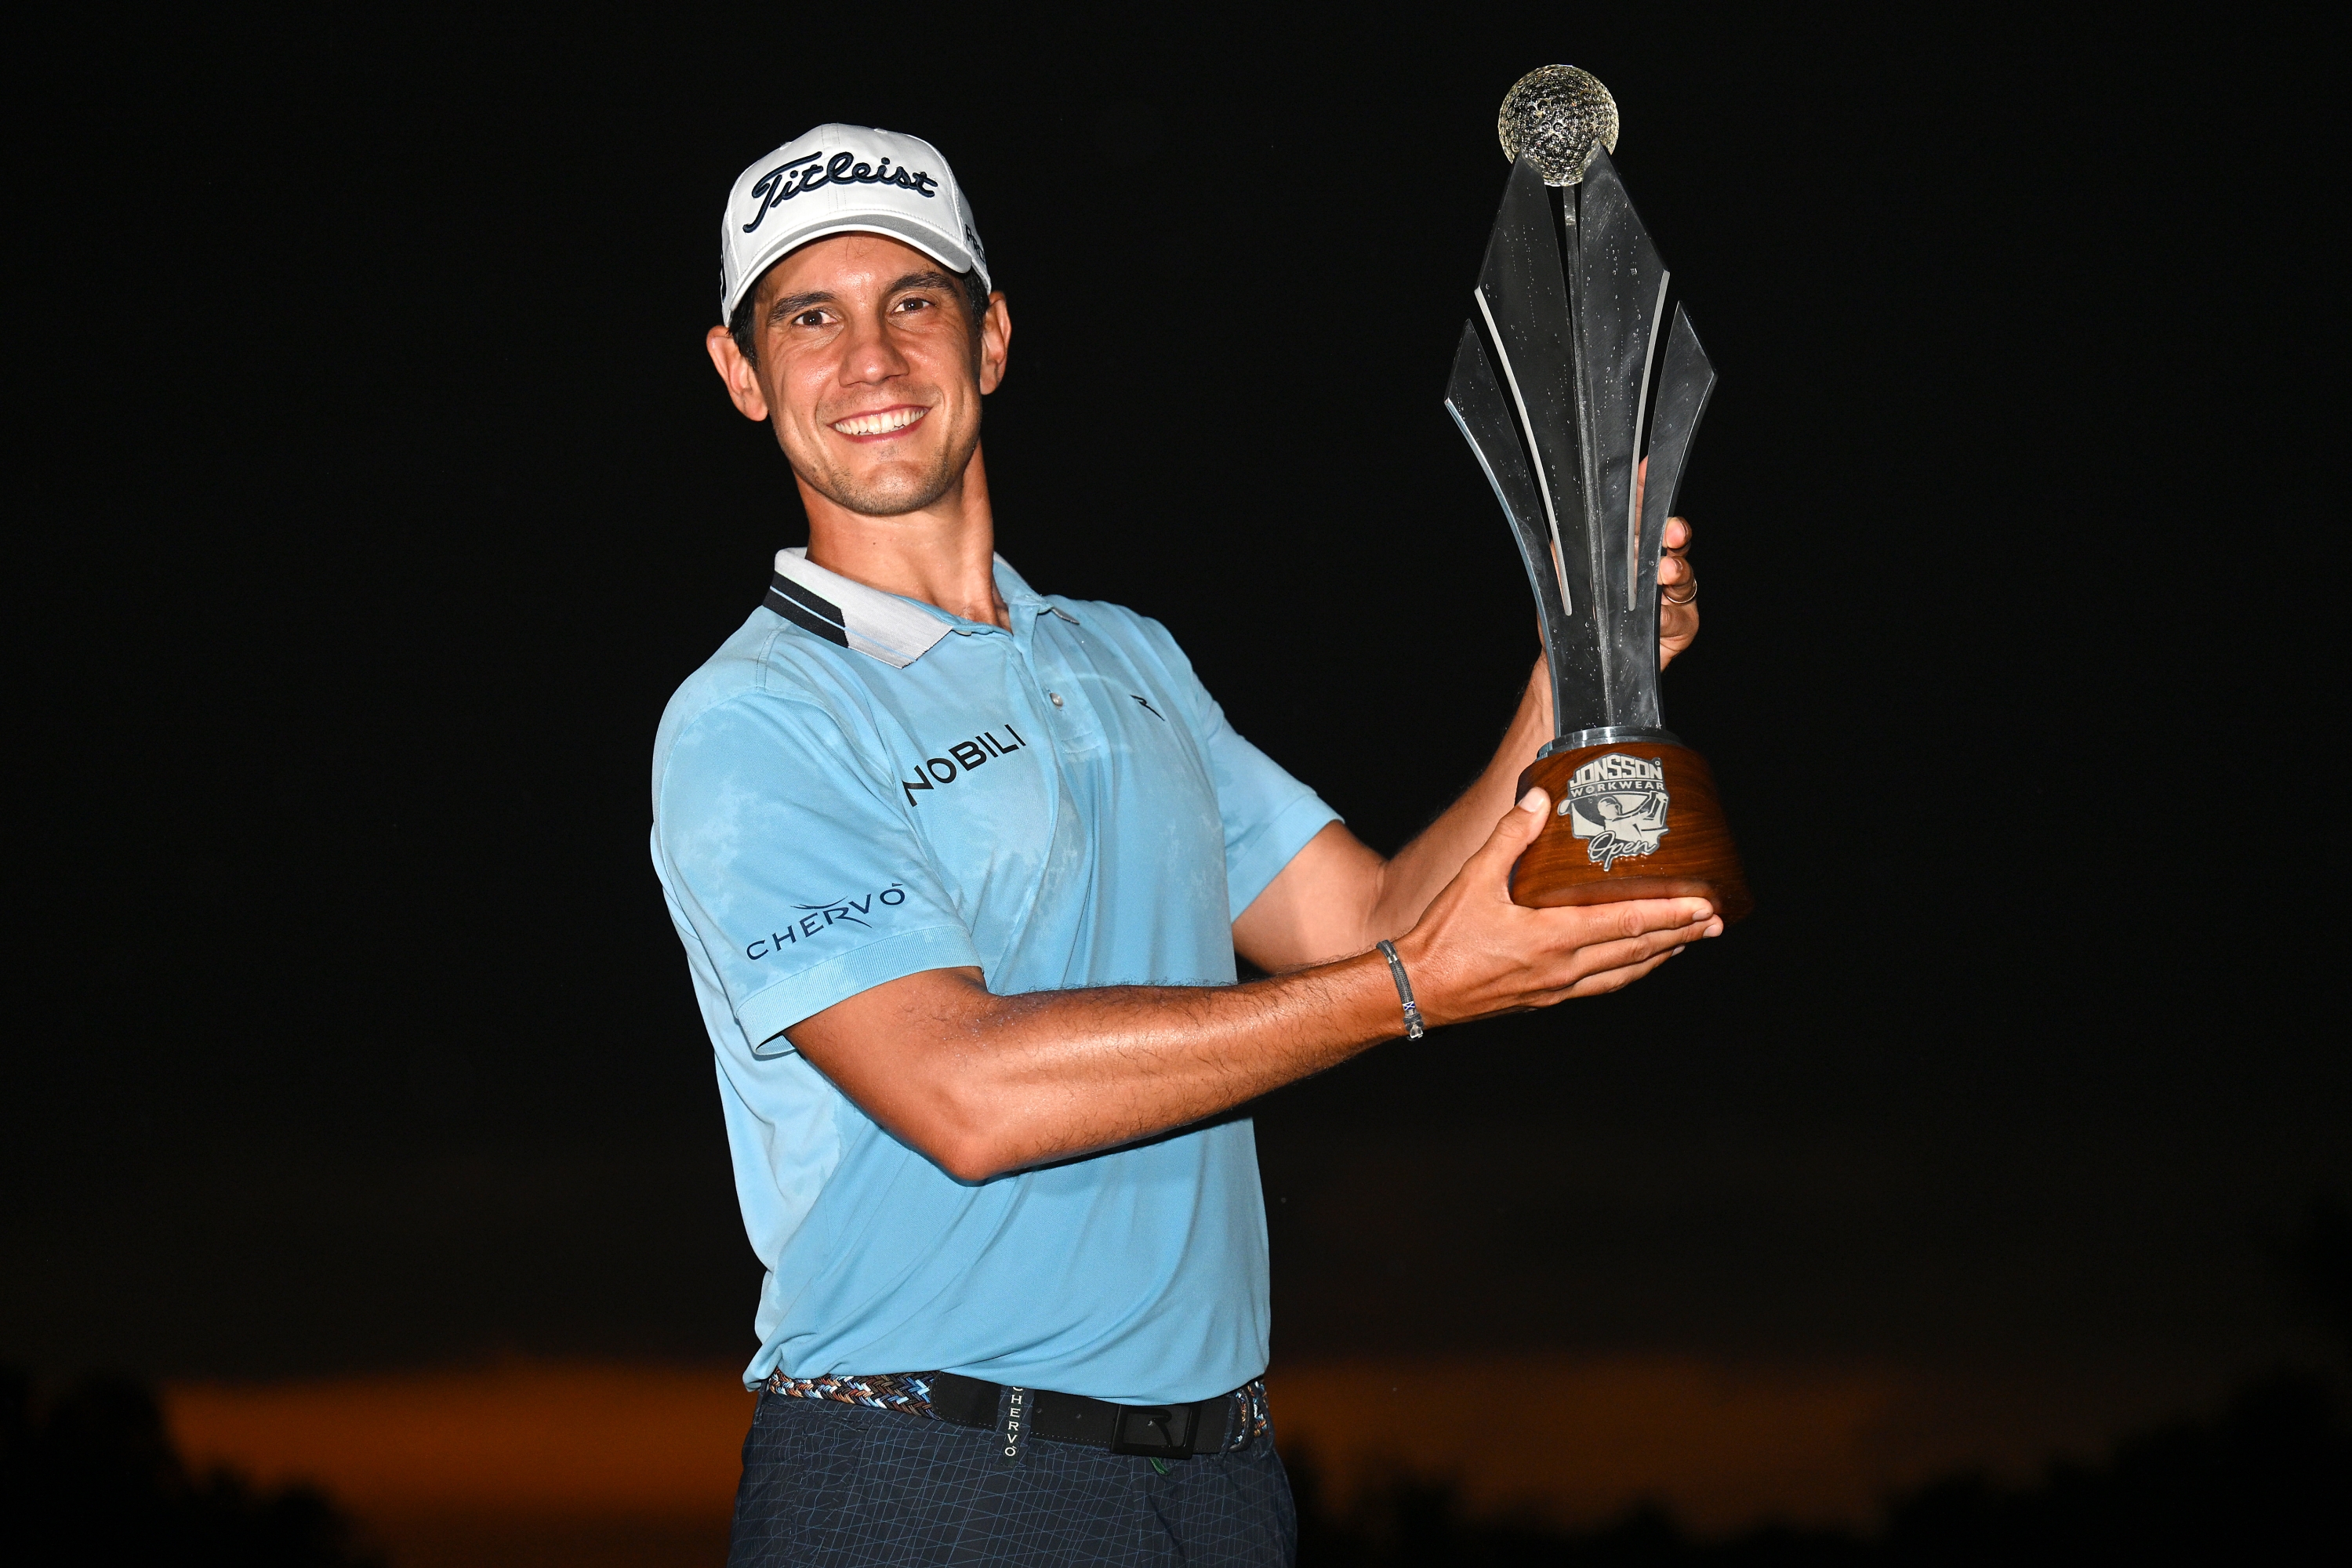 JOHANNESBURG, SOUTH AFRICA - MARCH 10: Matteo Manassero of Italy is awarded the trophy as he celebrates victory following day four of the Jonsson Workwear Open at Glendower Golf Club on March 10, 2024 in Johannesburg, South Africa. (Photo by Stuart Franklin/Getty Images)